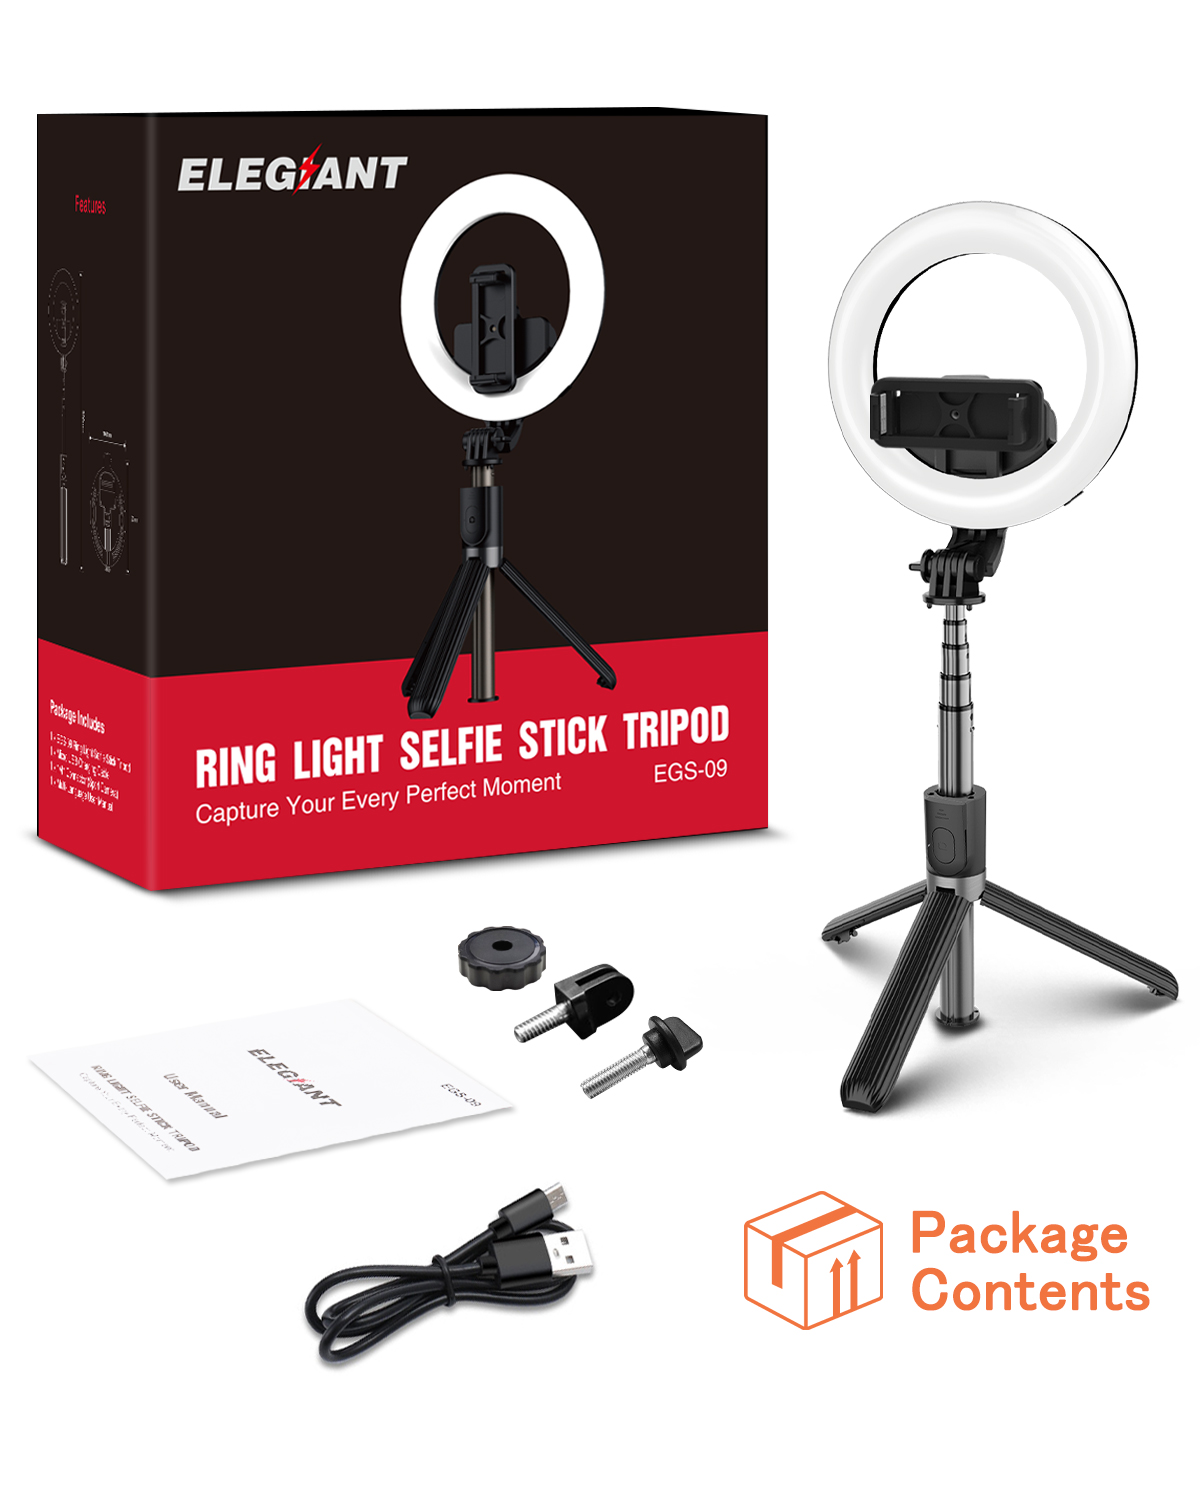 ELEGIANT-EG-09-LED-Ring-Light-Bluetooth-Selfie-Stick-Tripod-with-Remote-Control-Beauty-Fill-Lamp-for-1748938-7